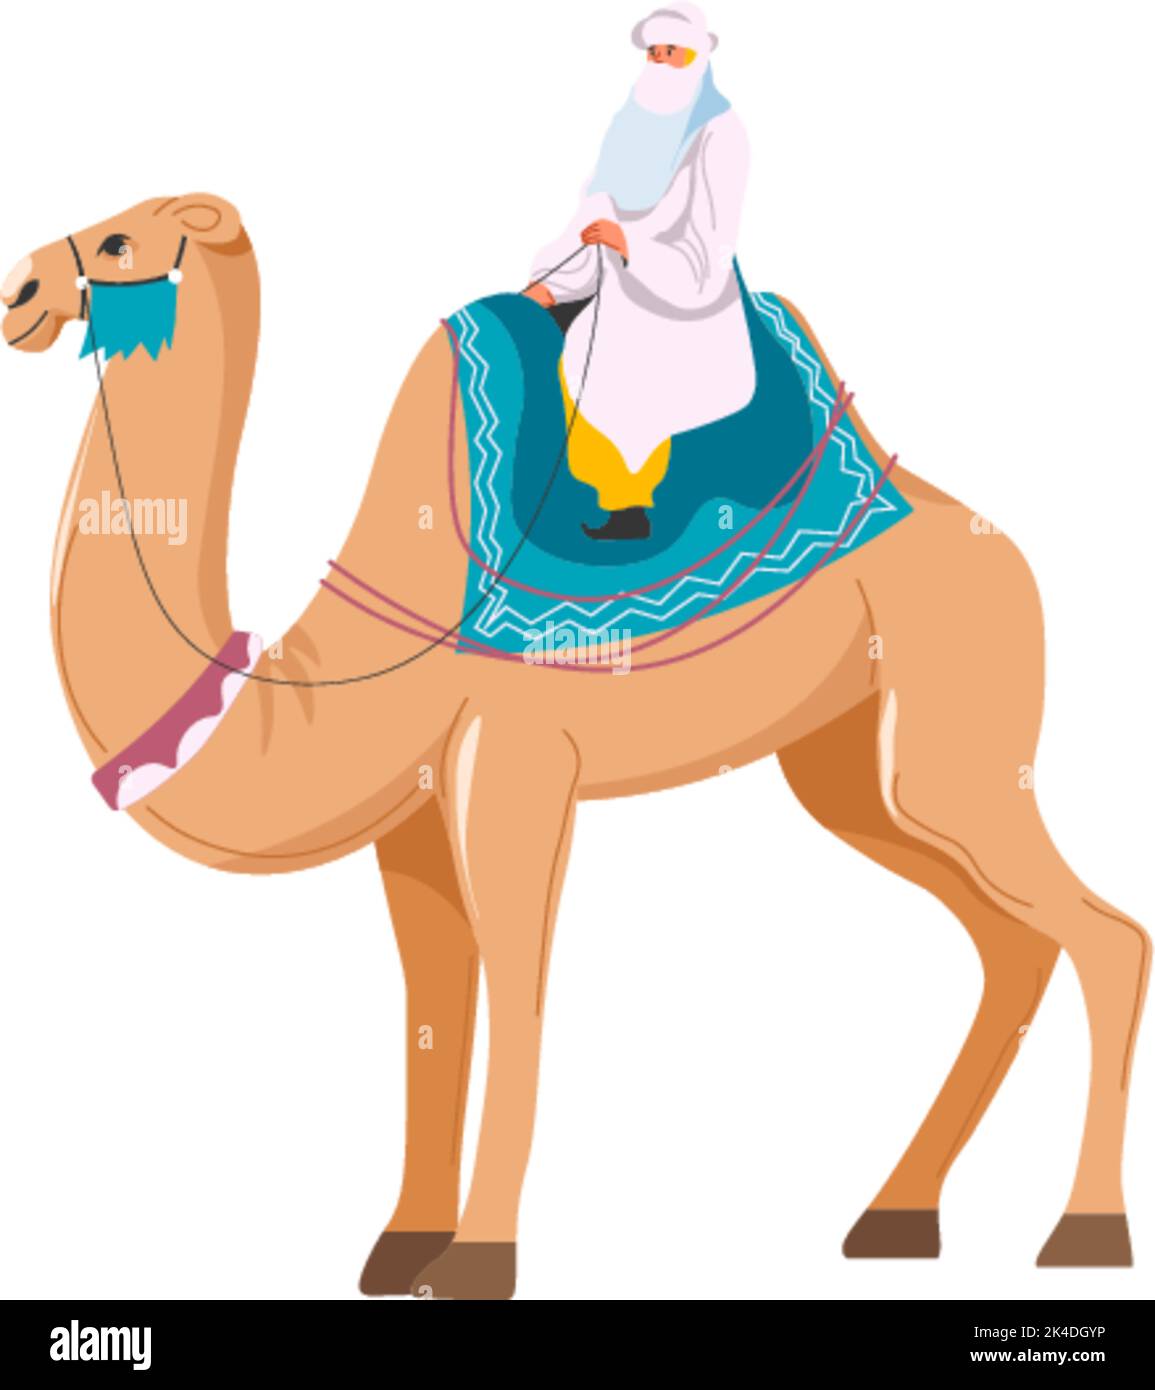 Sheikh on camel, Arabic country transport fun Stock Vector